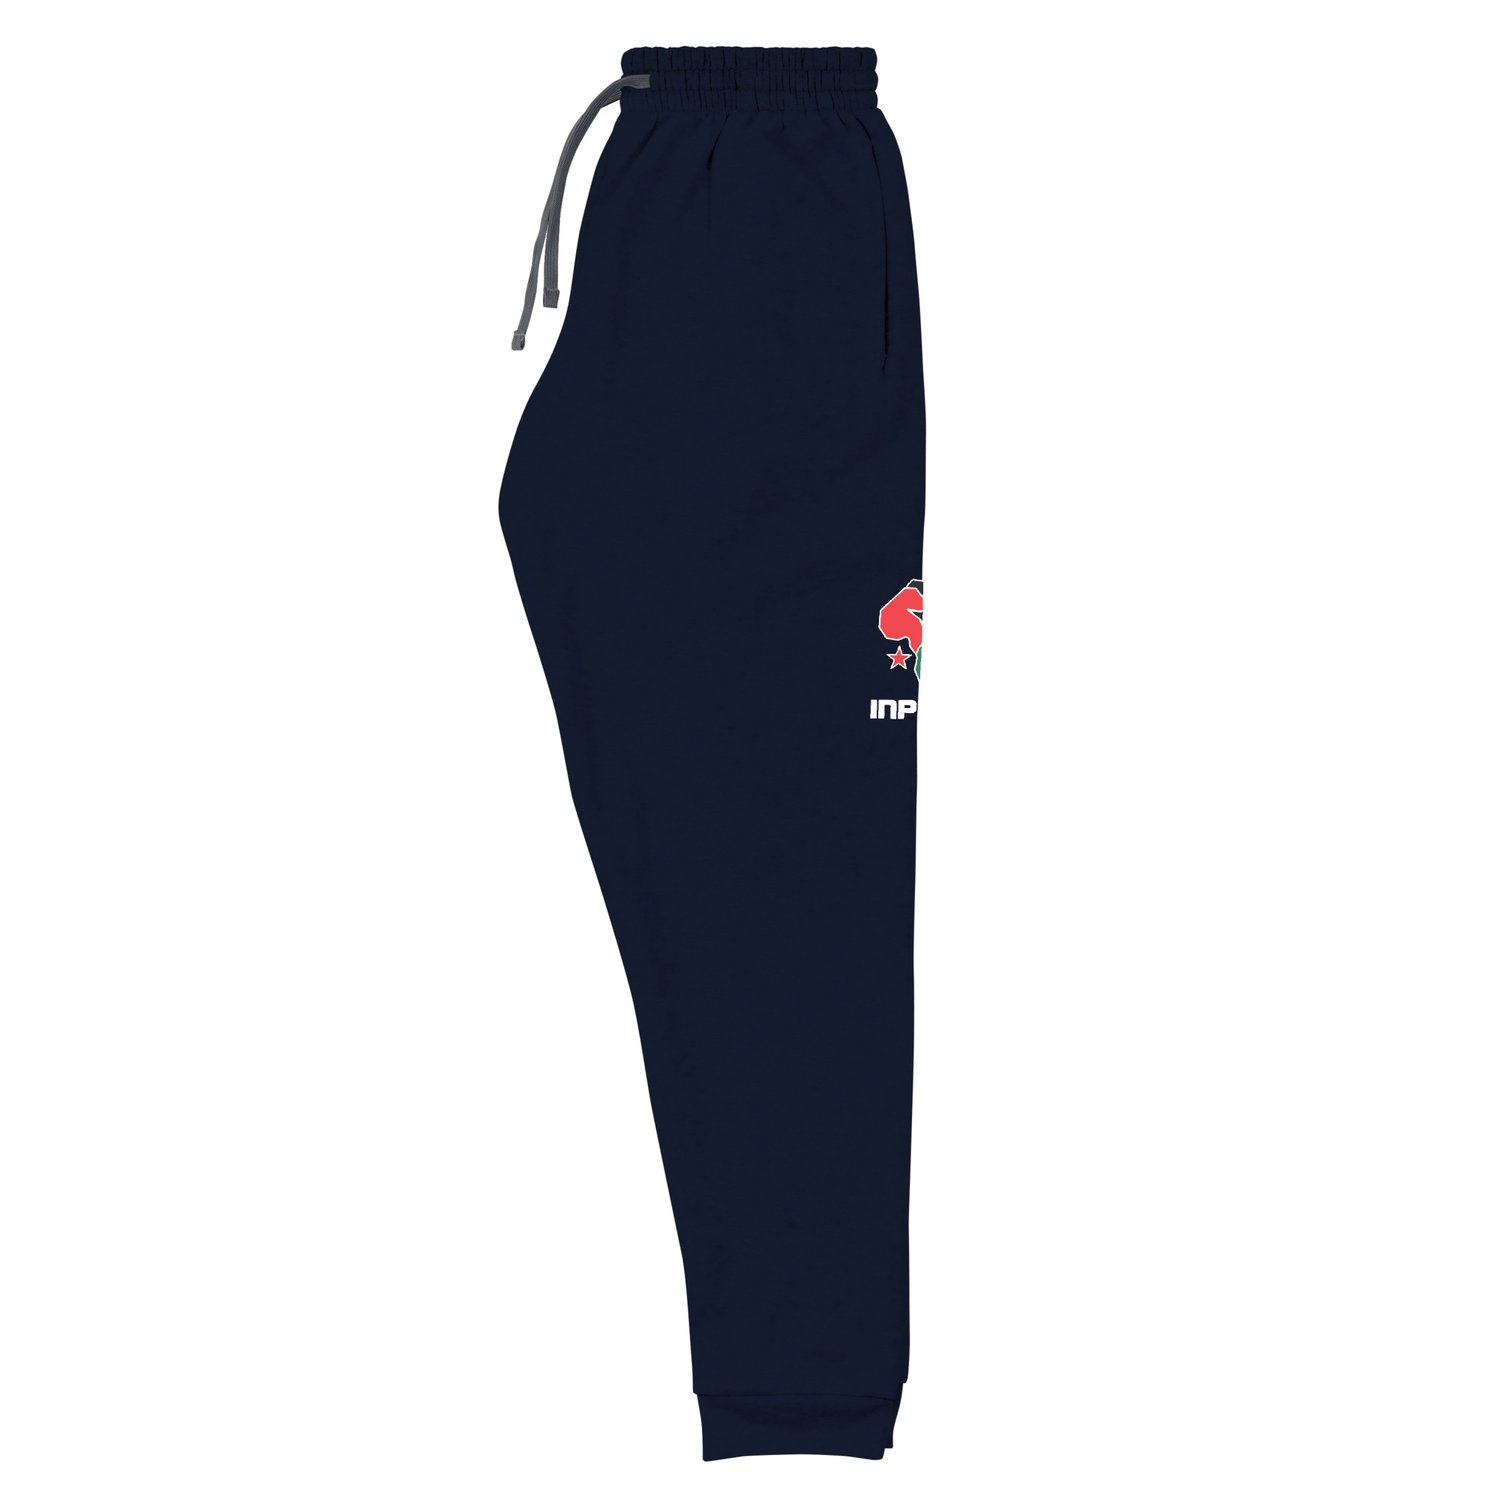 Image of "Get Fit for the Revolution" sweatpants